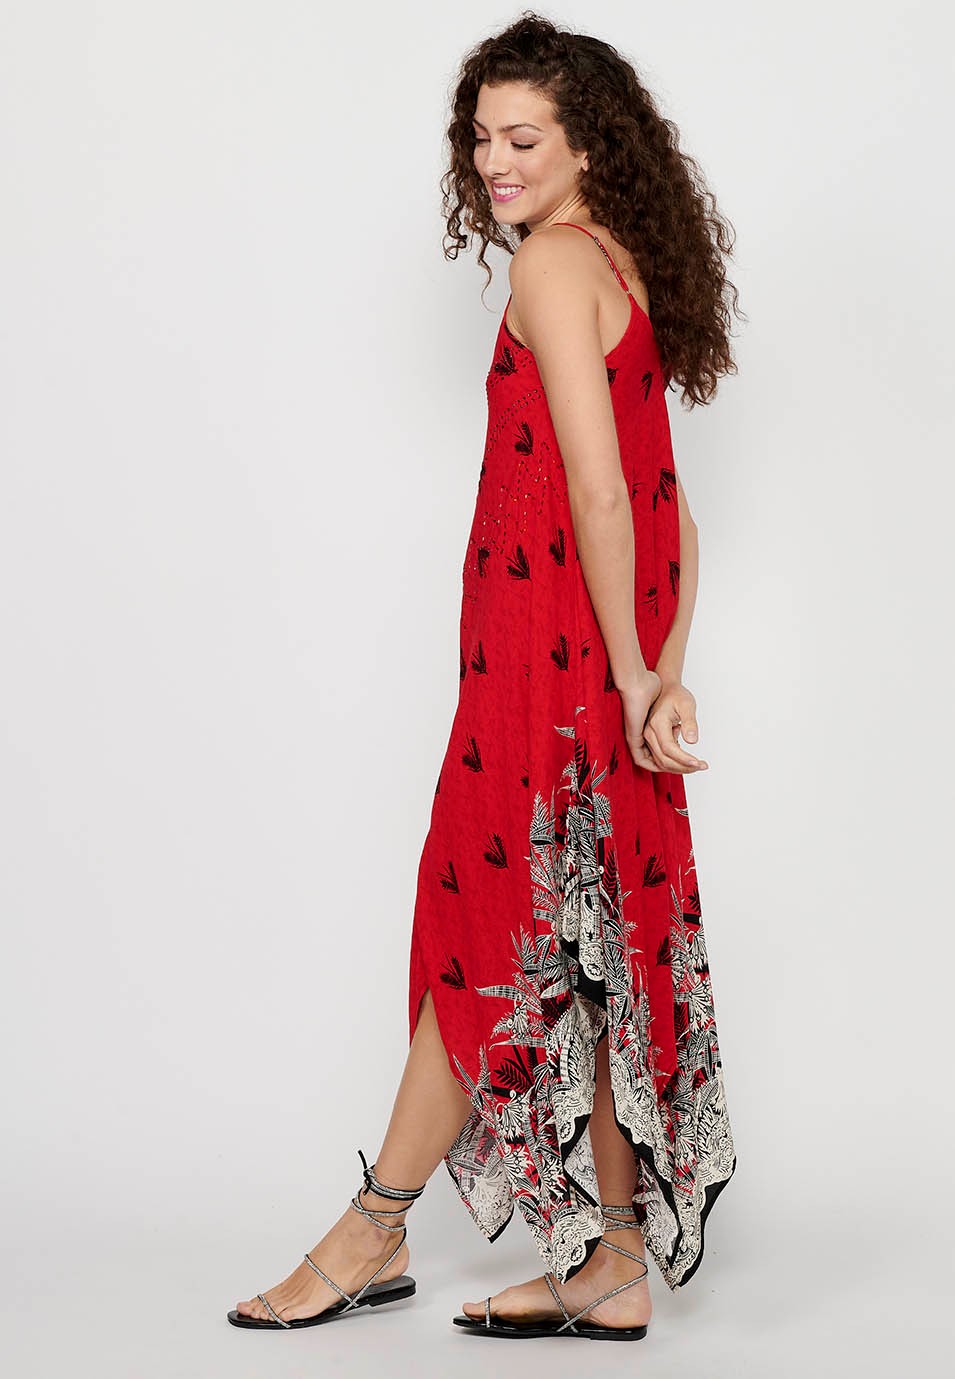 Strap Dress with V-neckline and Red Floral Print for Women 5